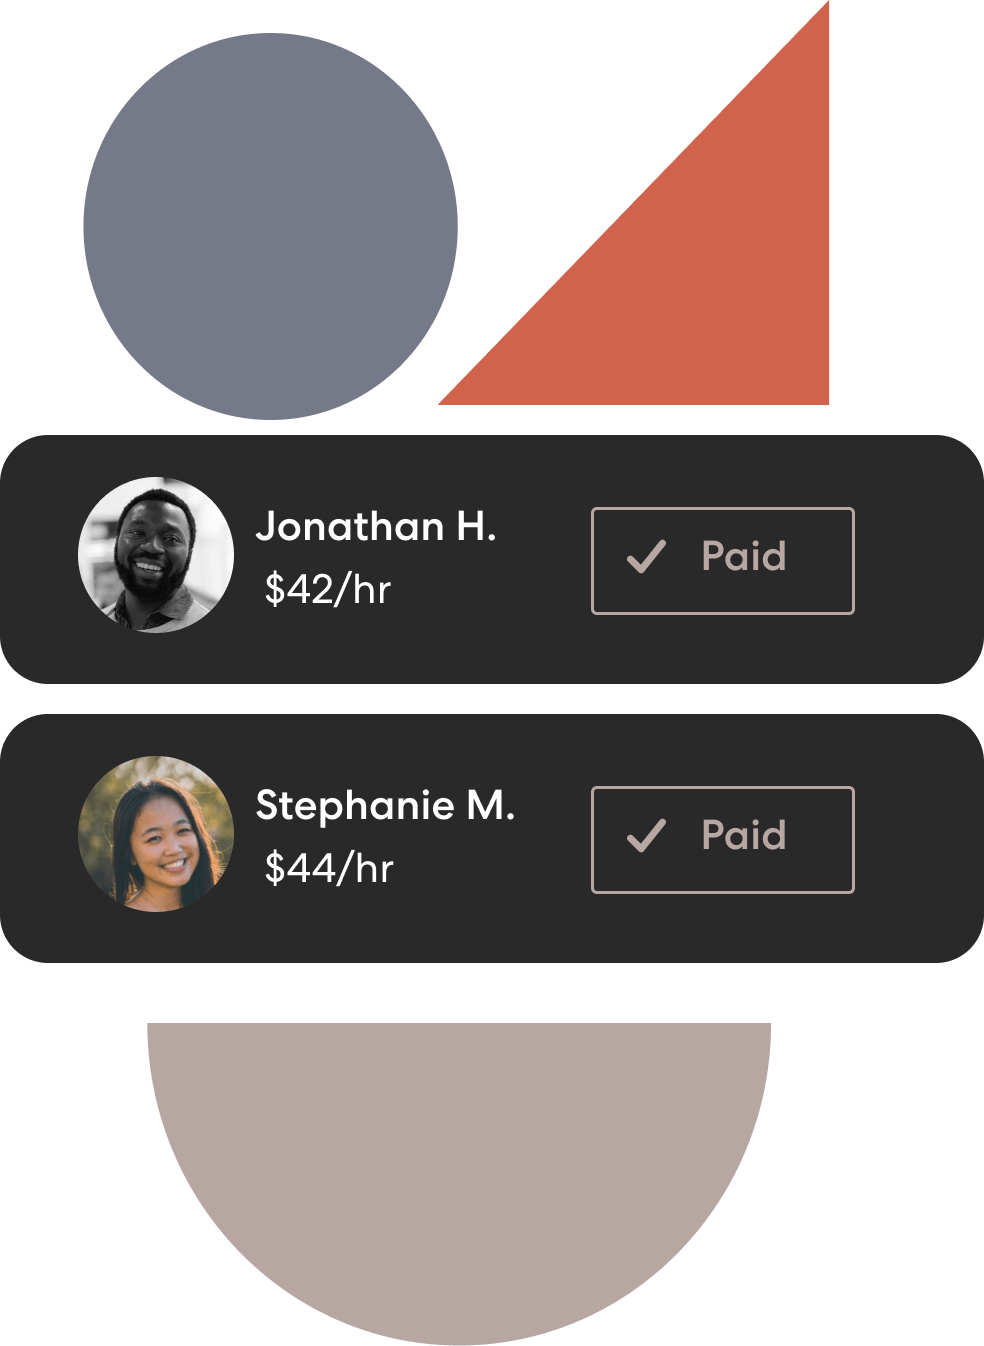 Example of payroll UI, showing two people paid for their work.